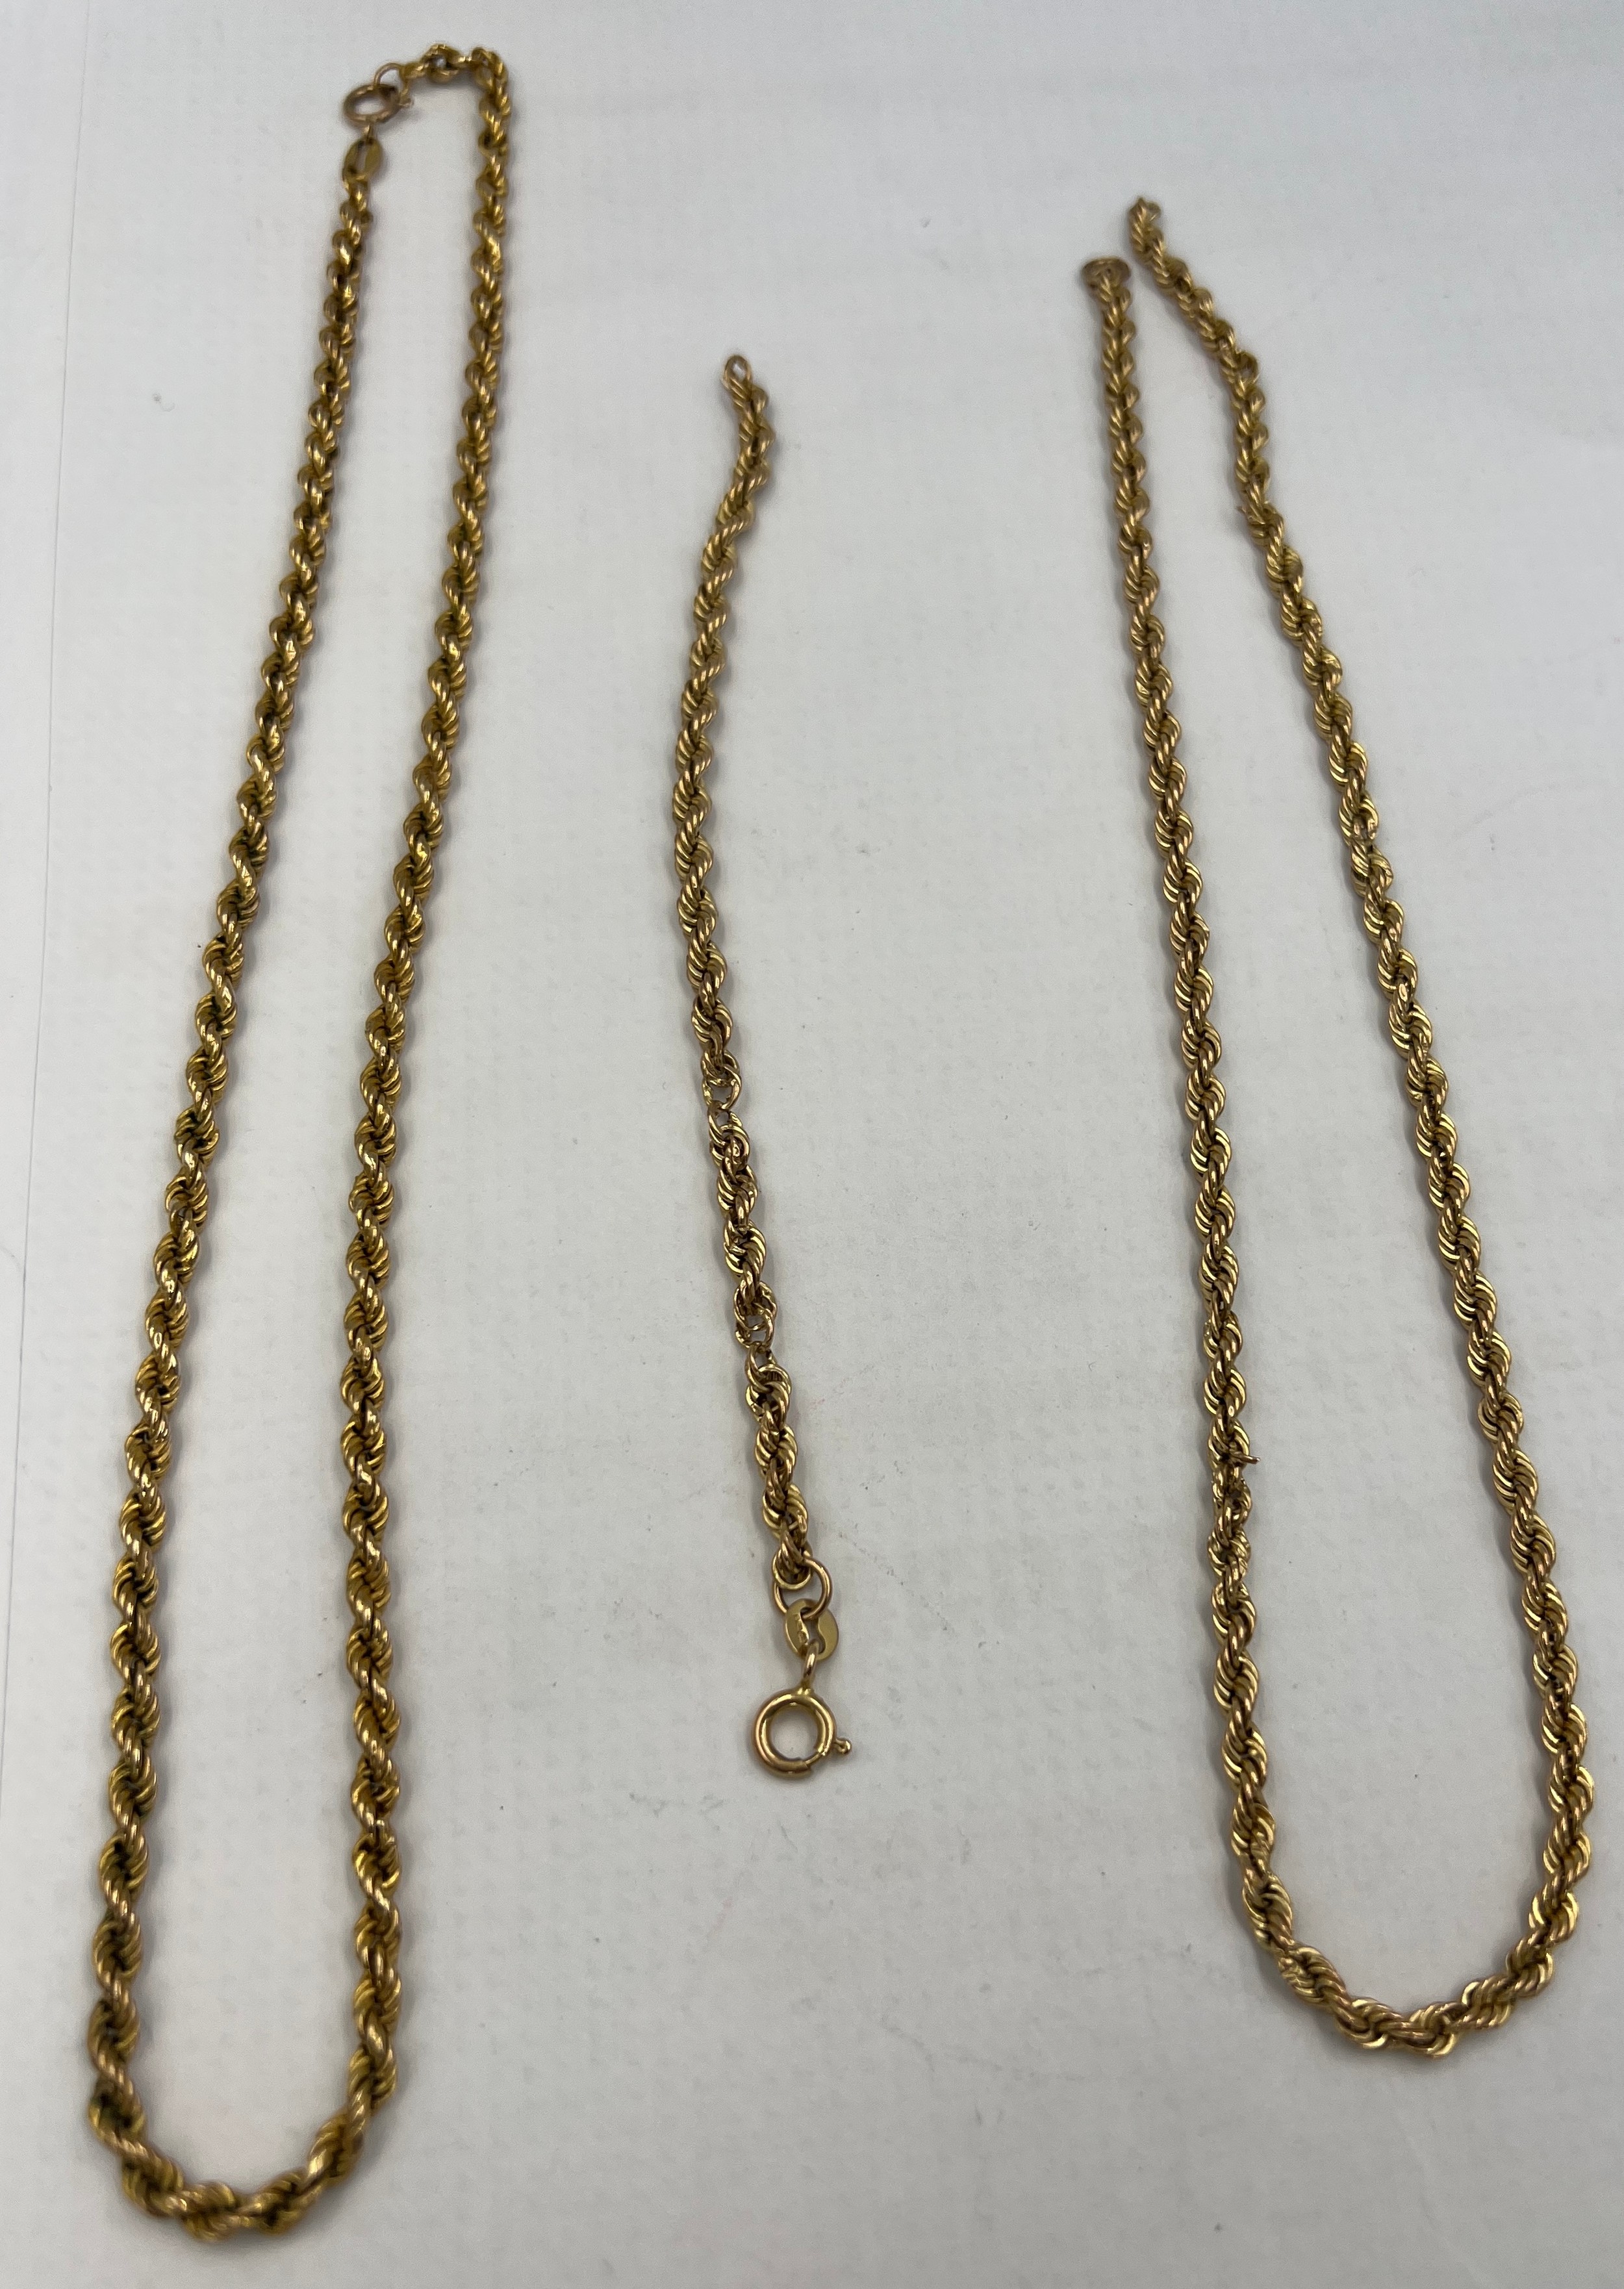 Two 9 carat gold twist chain necklaces and a 9 carat gold bracelet.Total weight 8.4gm.